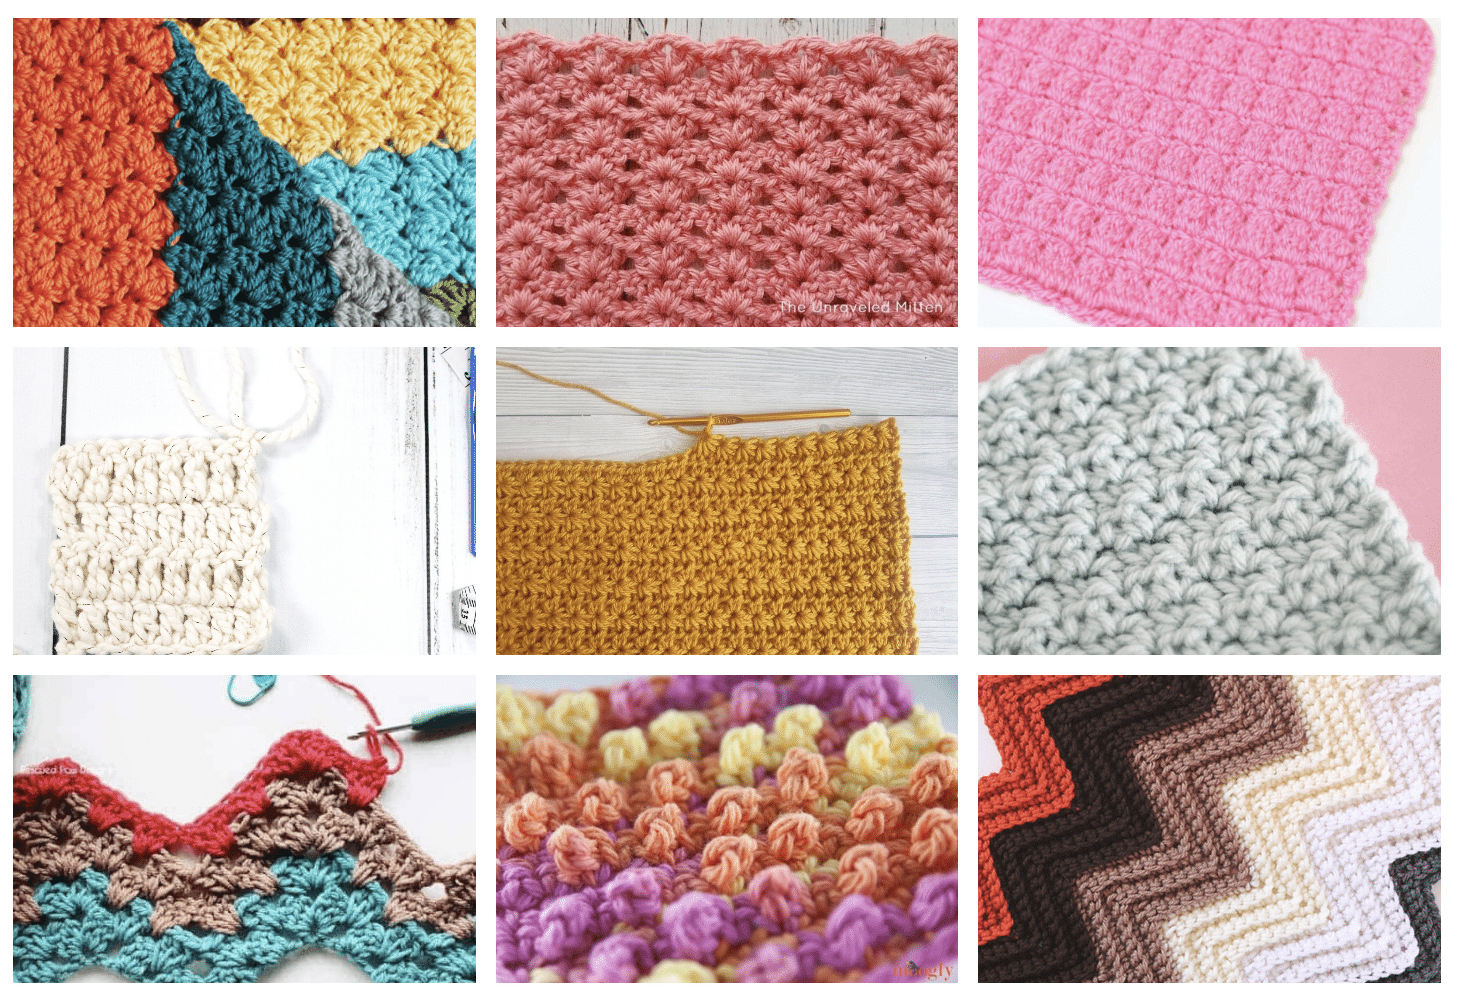 30 Must Make Simple Crochet Stitches for Beginners - Easy Crochet Patterns